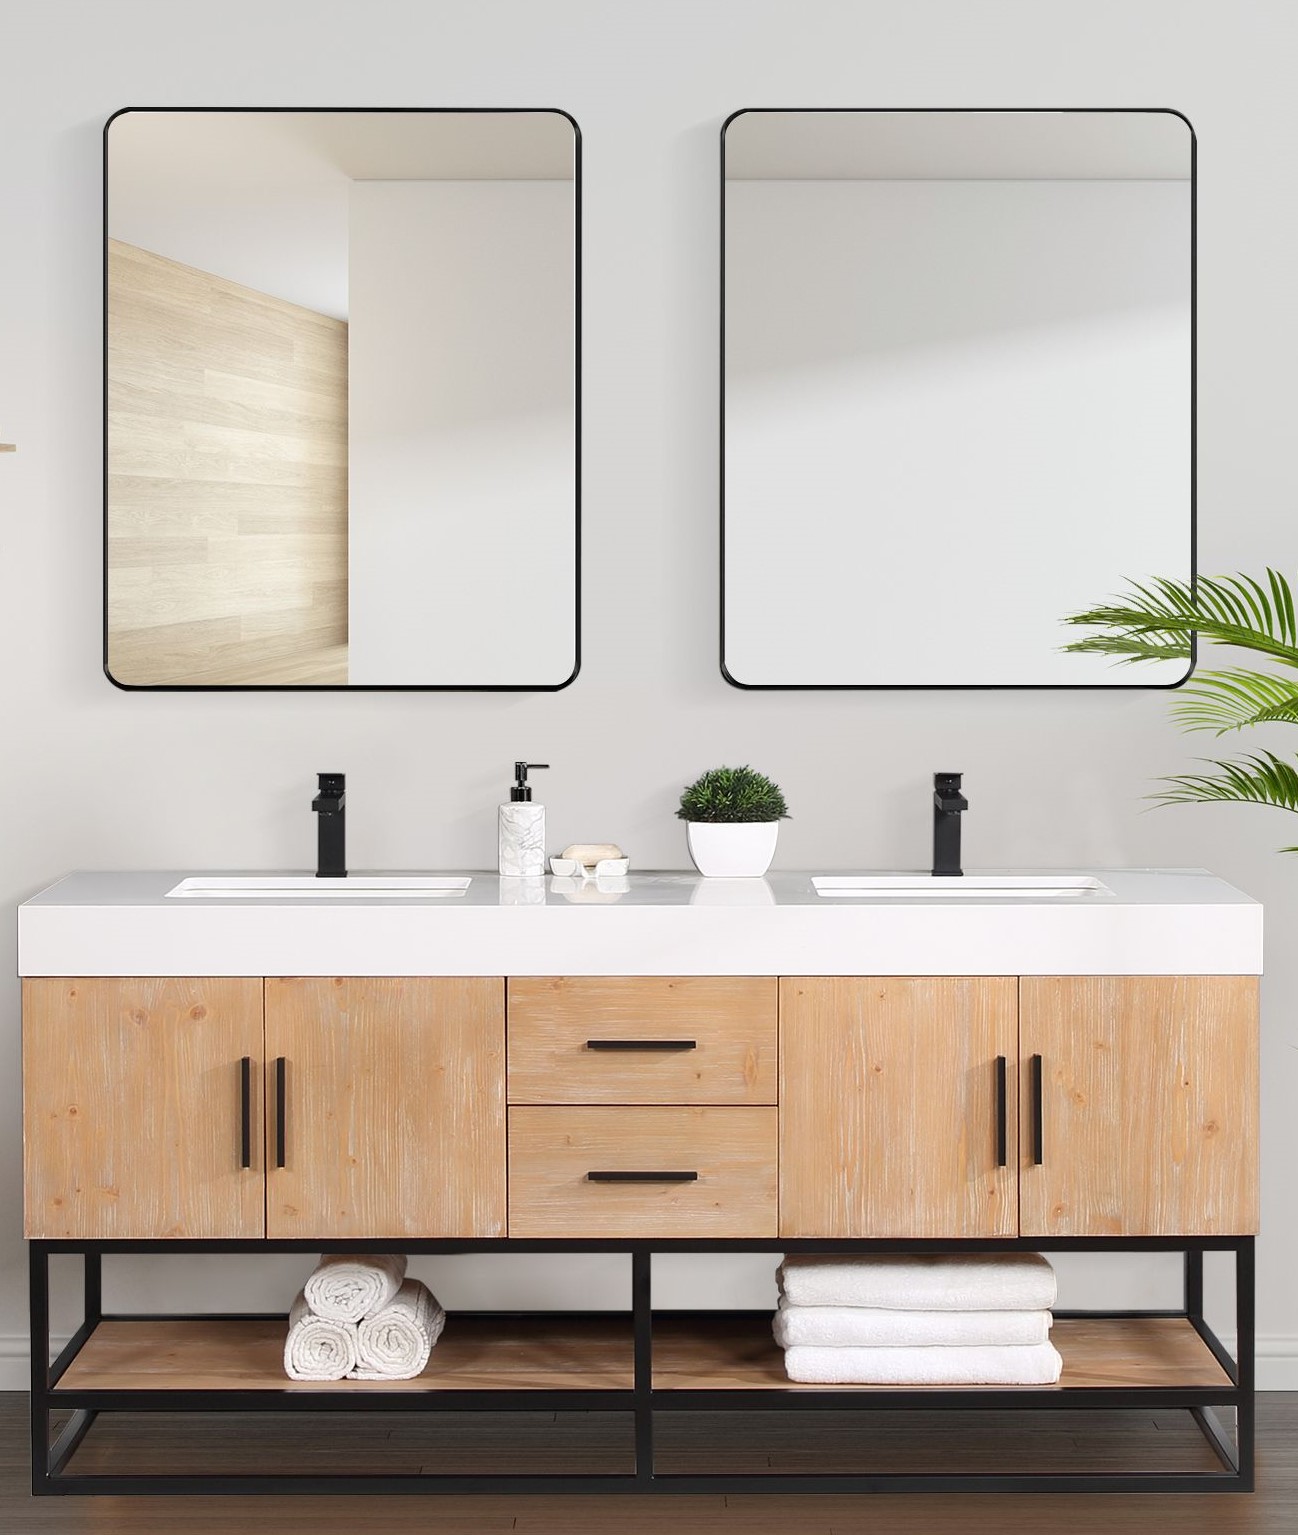 Issac Edwards 72" Double Bathroom Vanity in Light Brown with Matte Black Support Base and White Composite Stone Countertop with Mirror